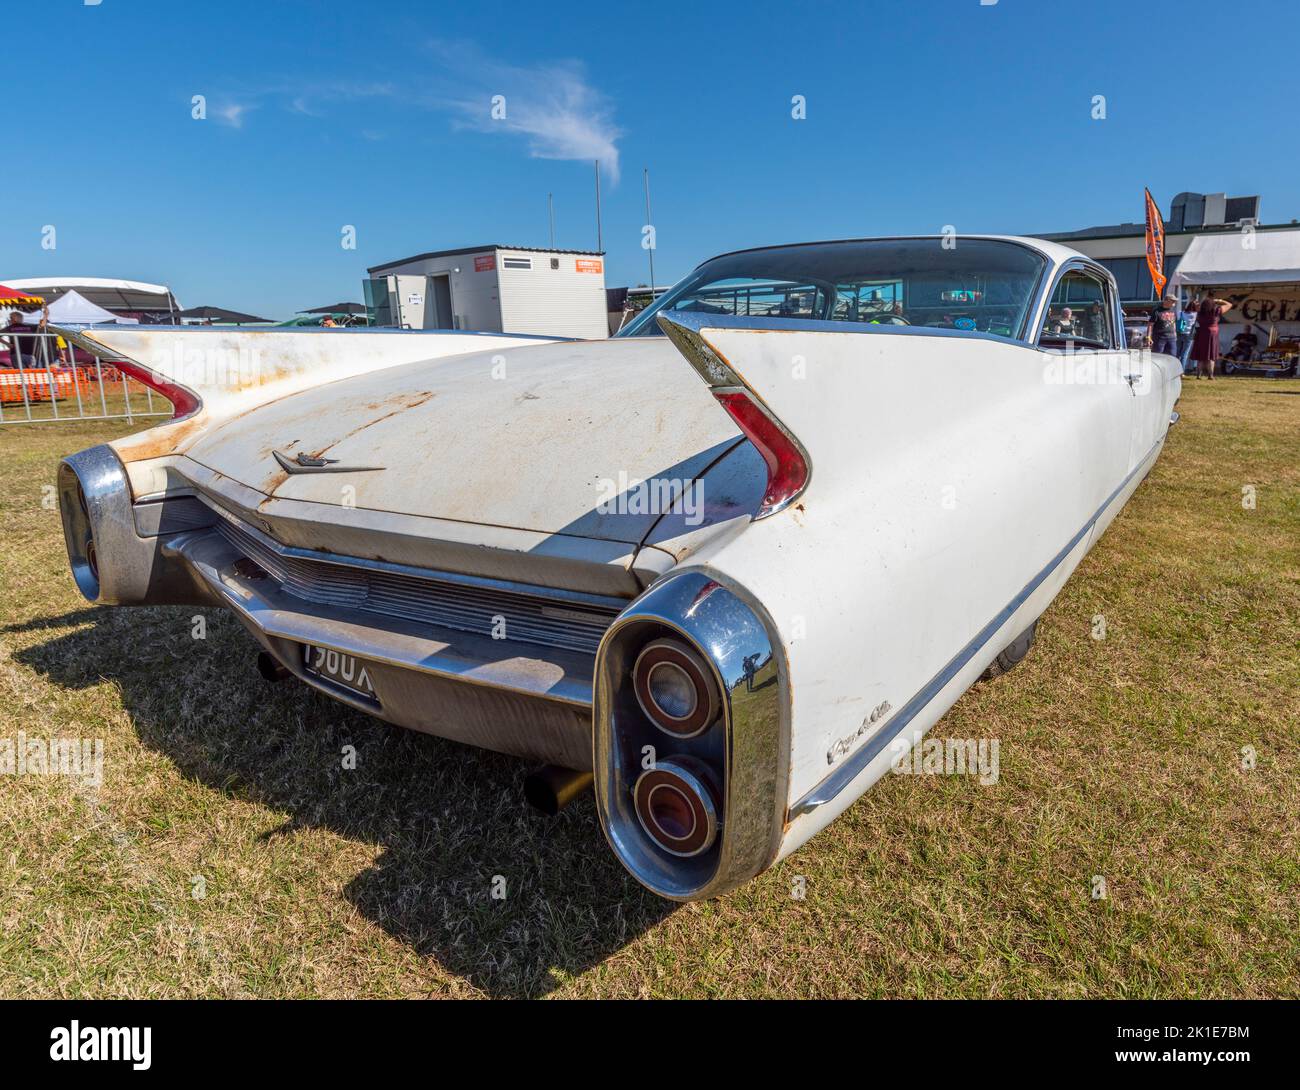 1960 Cadillac Coupe de Ville, yet to be restored, on show near Brisbane Stock Photo